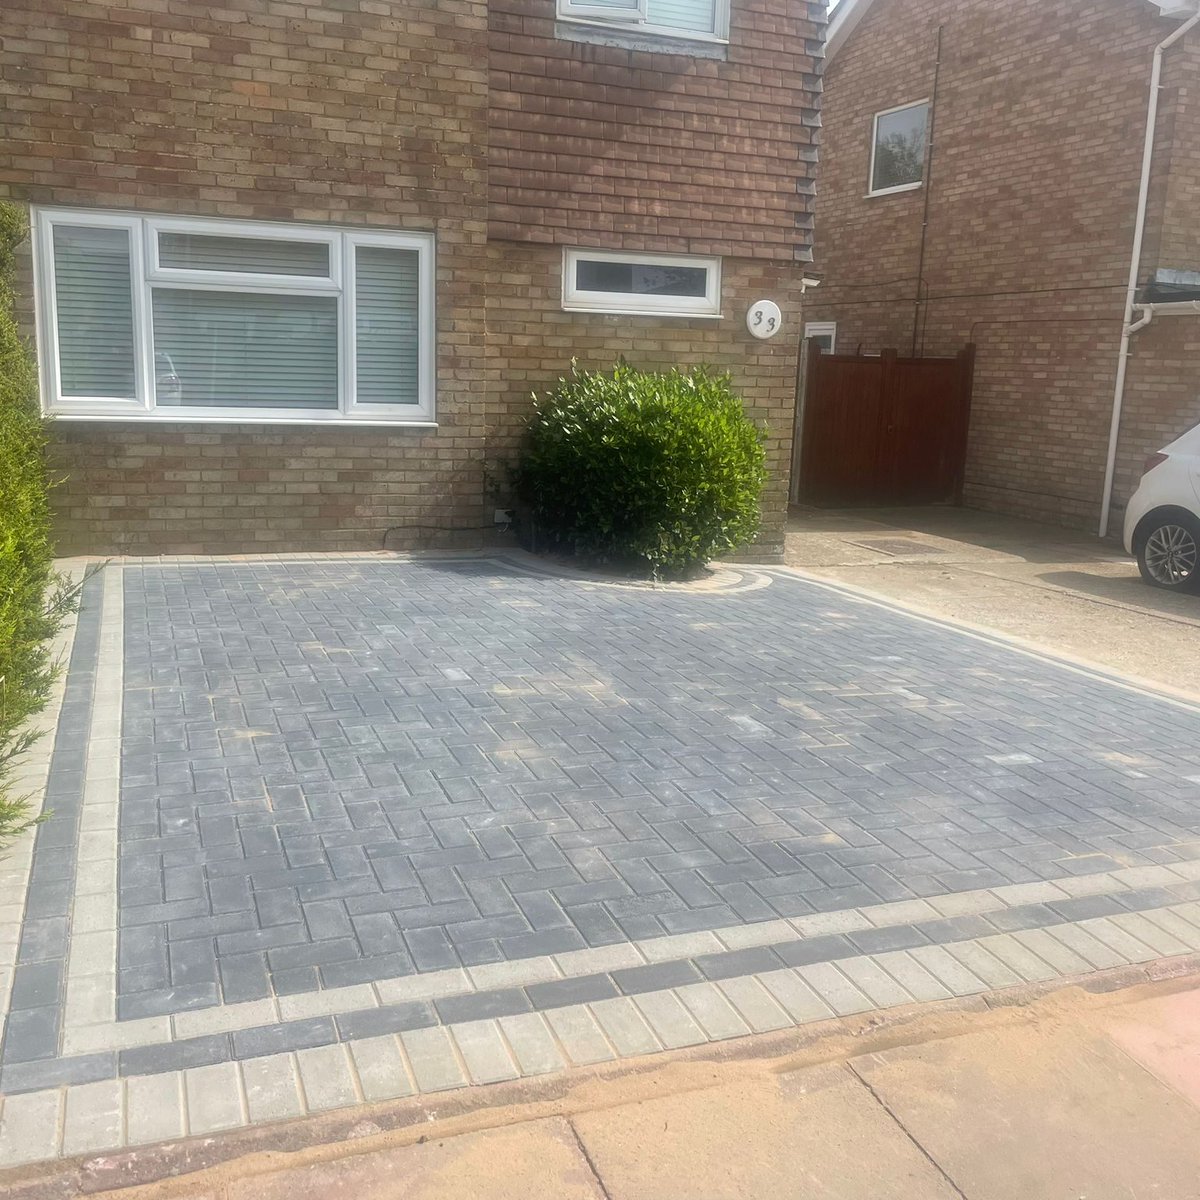 💥We completed this two-coloured blocked paved driveway update for a home on Hudson Close, Worthing. ☎️ If you would like to transform your property, please give us today at 01323 887 678

#gladstonepaving #driveways #patios #patio #landscape #landscaping #resin #paving #home